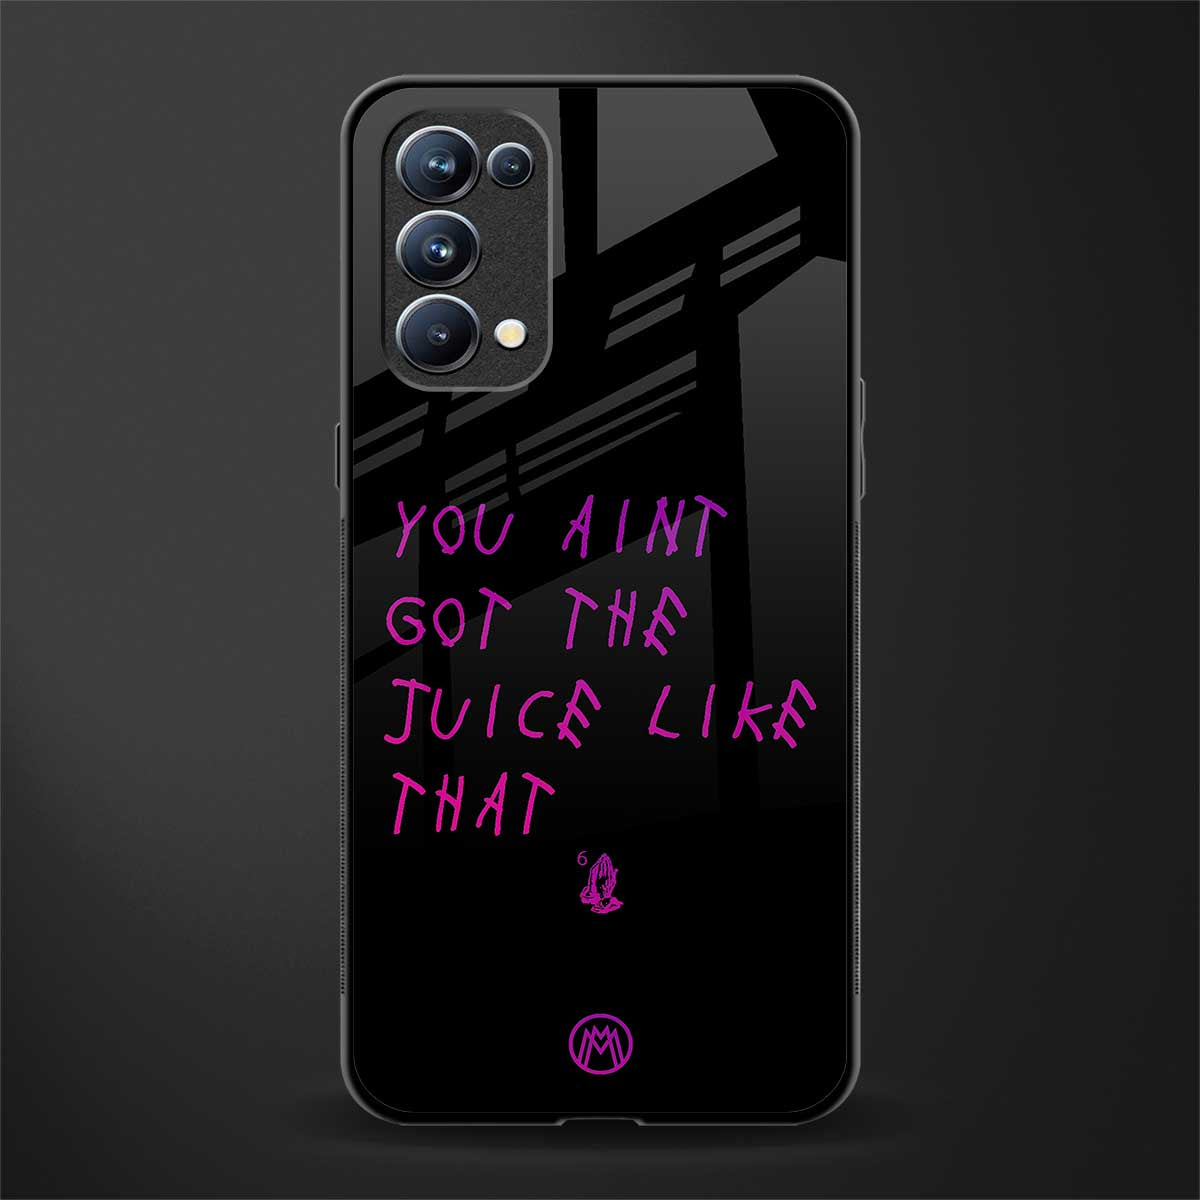 ain't got the juice black edition glass case for oppo reno 5 pro image